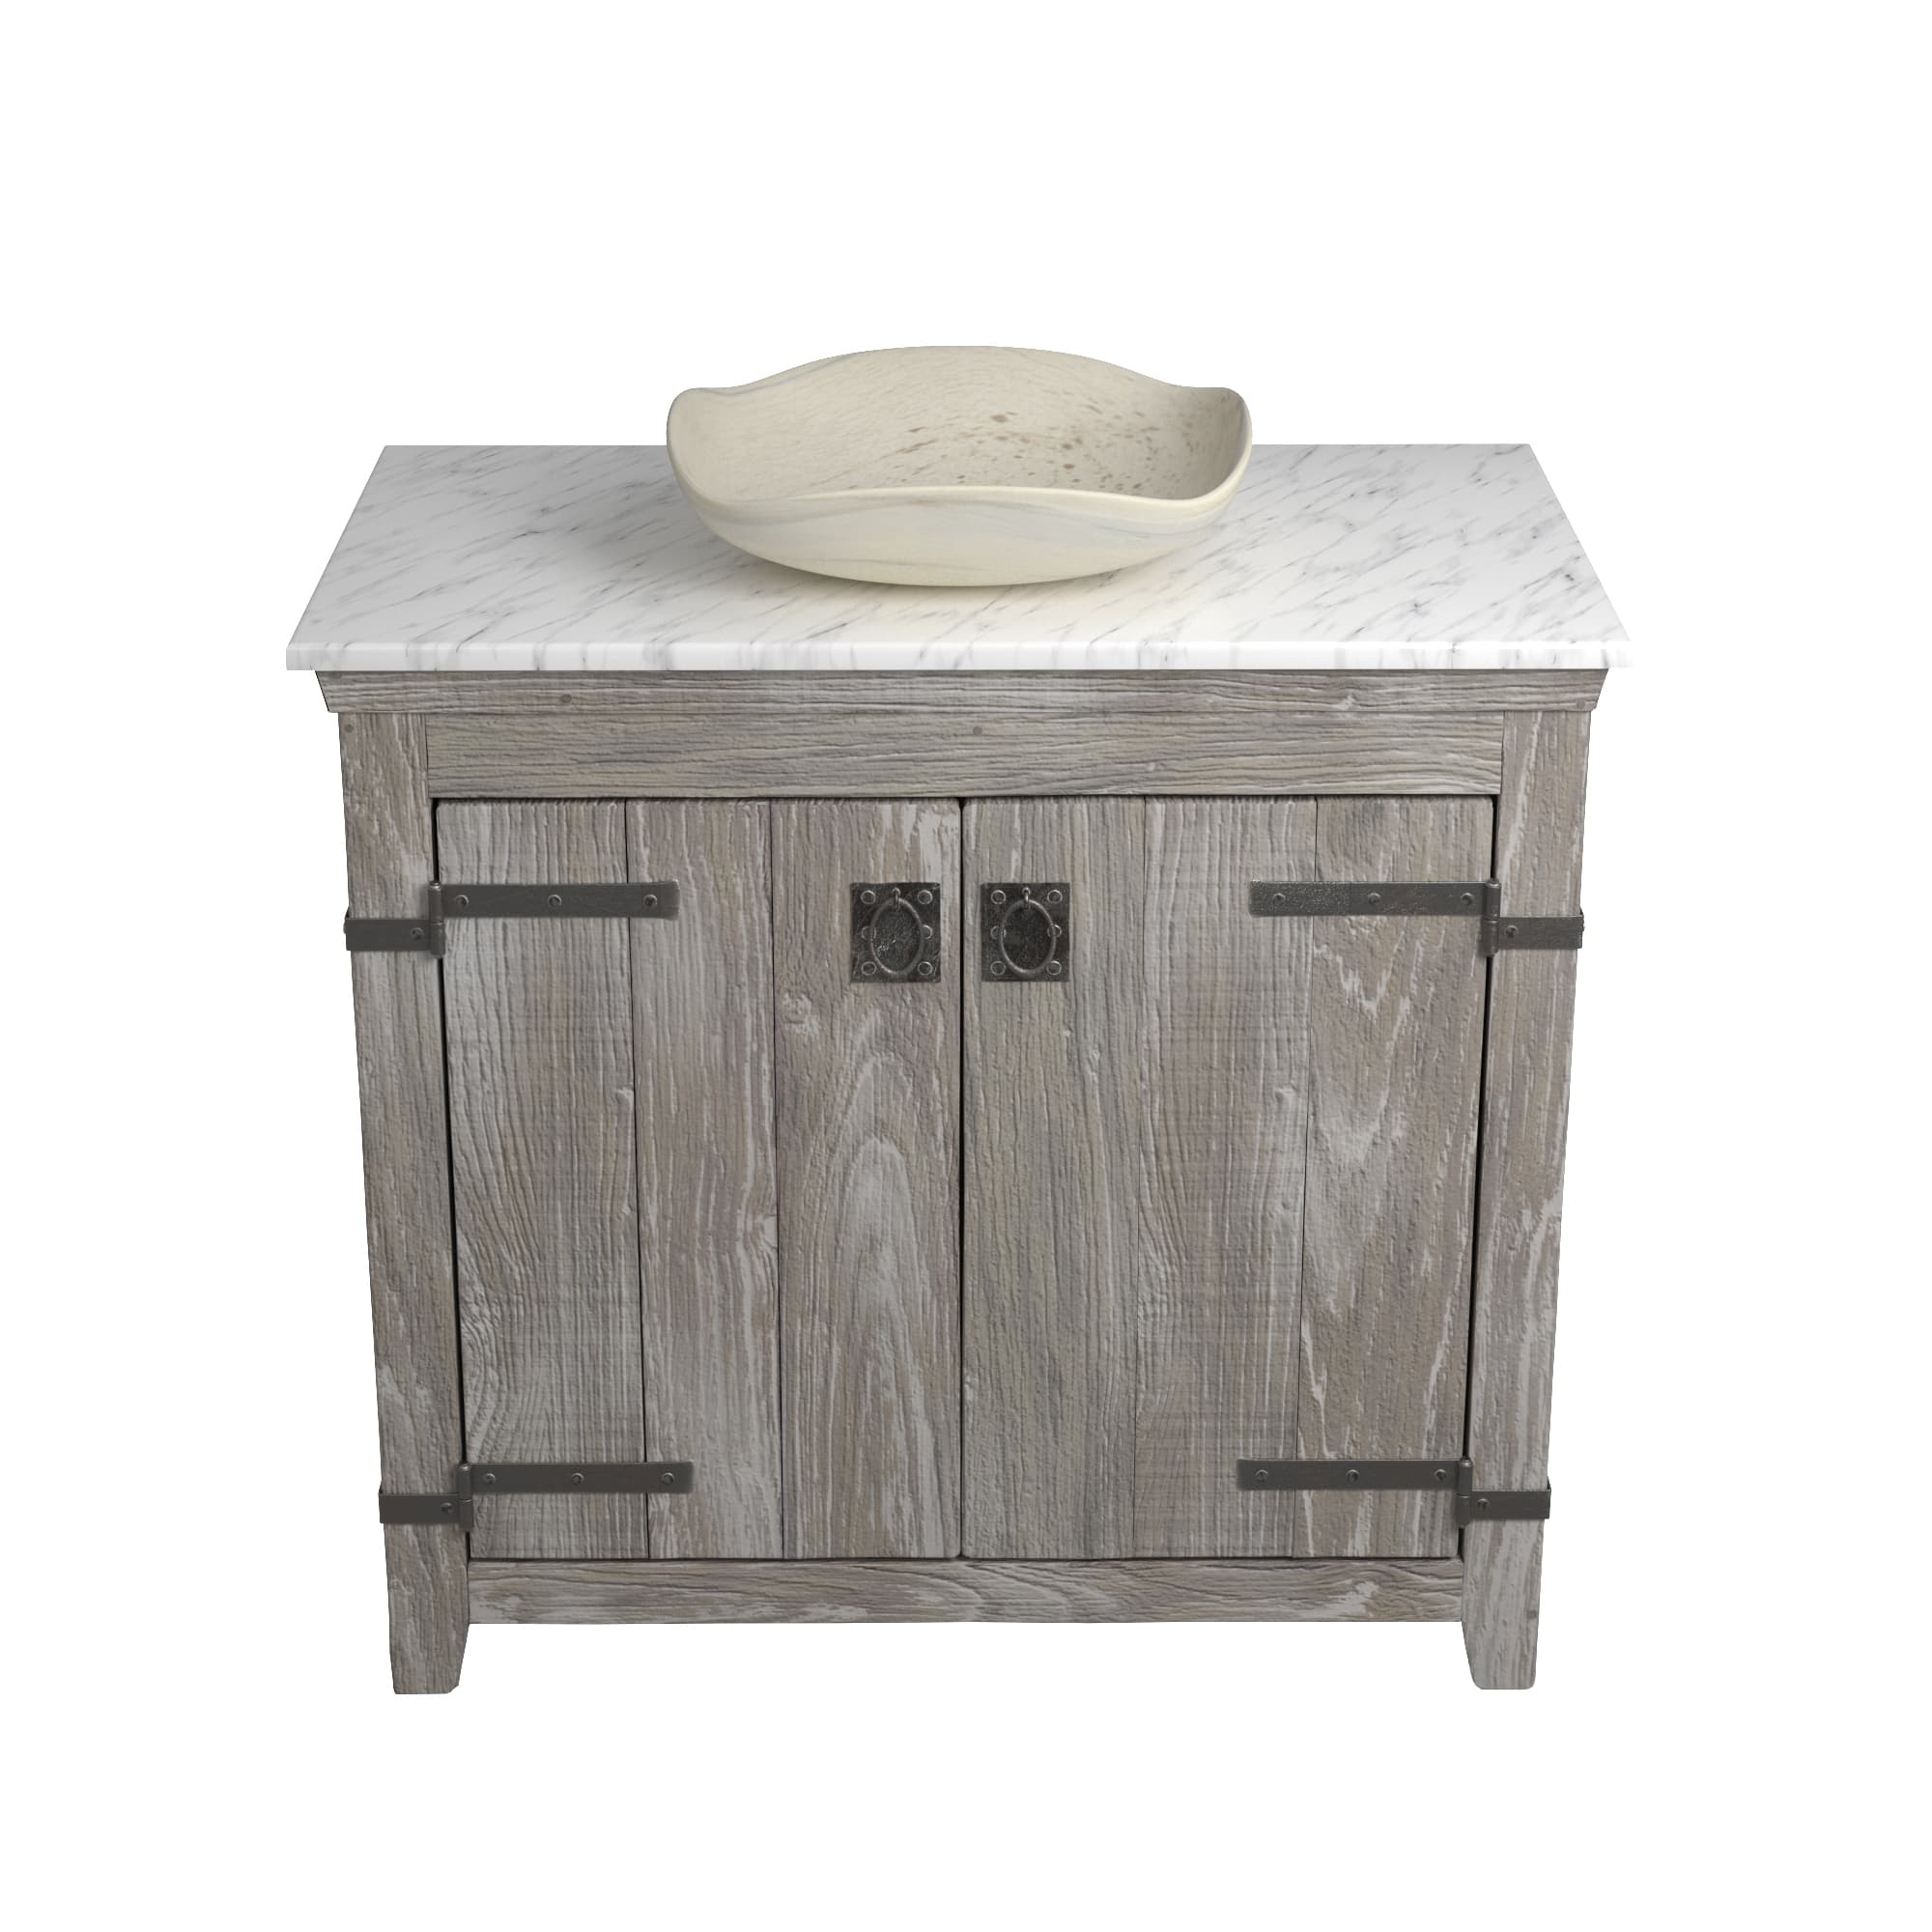 Native Trails 36" Americana Vanity in Driftwood with Carrara Marble Top and Lido in Beachcomber, Single Faucet Hole, BND36-VB-CT-MG-023